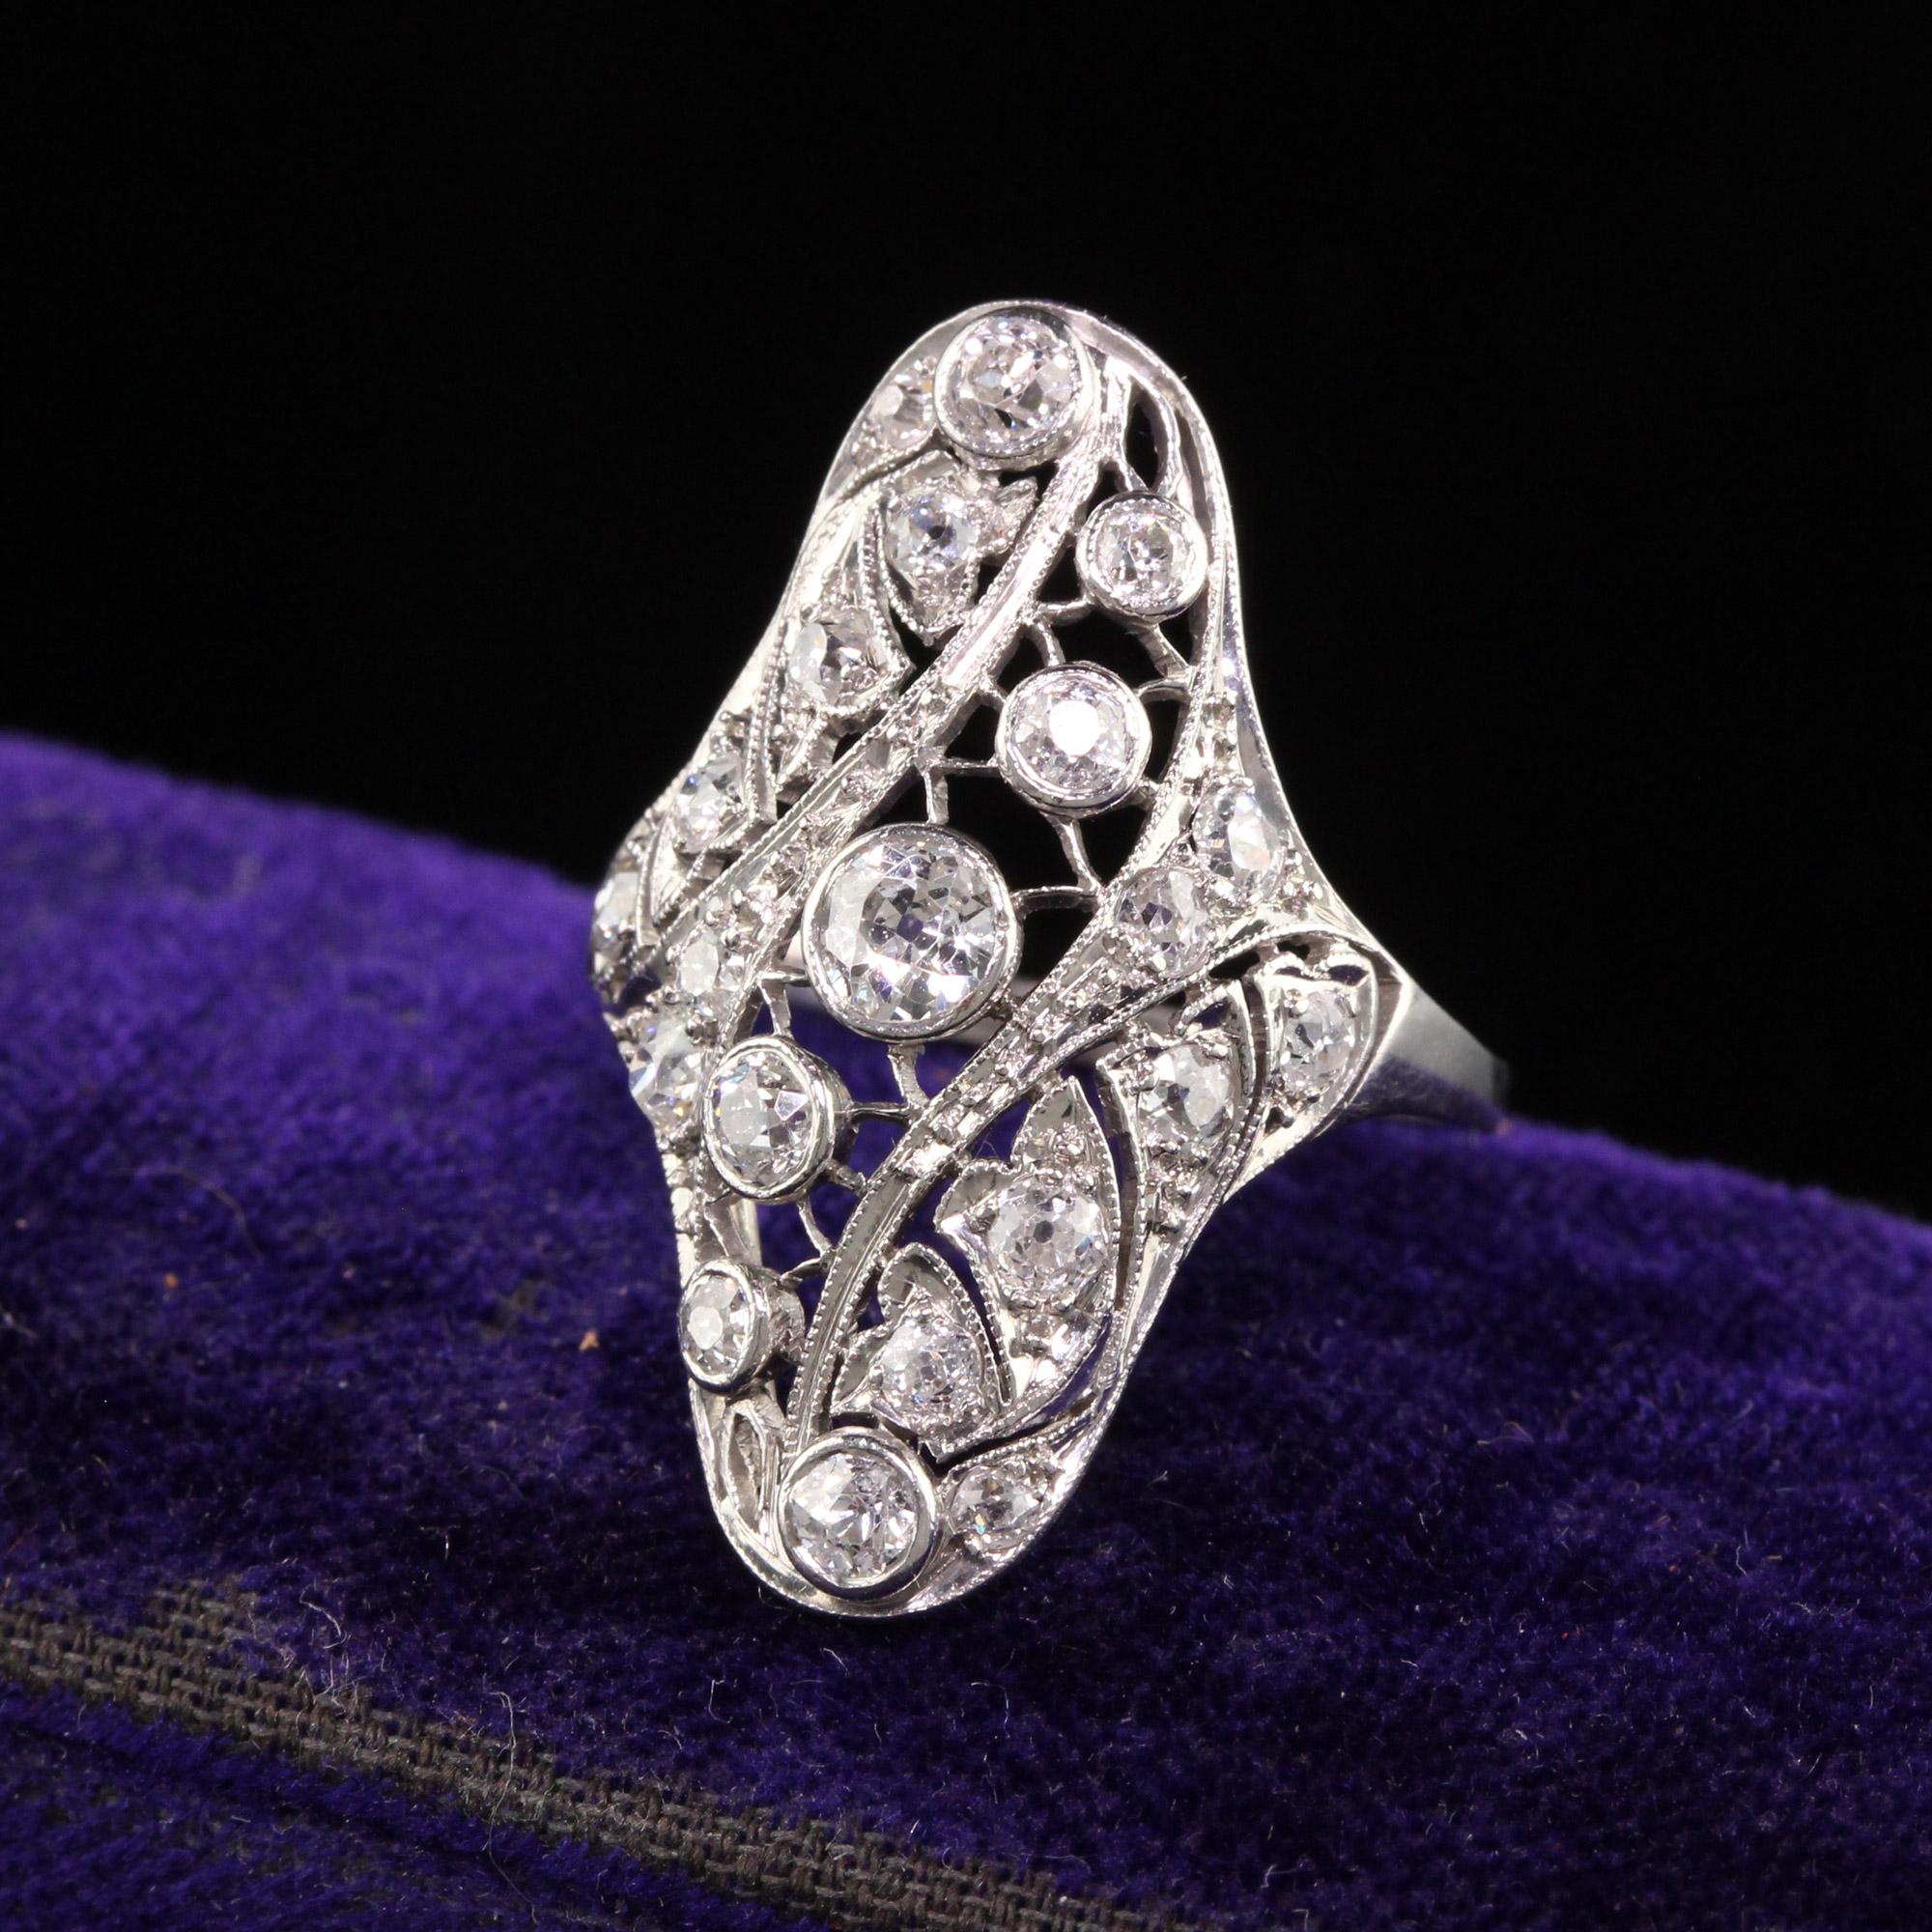 Beautiful Antique Edwardian Platinum Old European Diamond Filigree Shield Ring. This incredible art deco shield ring is crafted in platinum and has old european cut diamonds set in a gorgeous art deco filigree mounting.

Item #R1222

Metal: